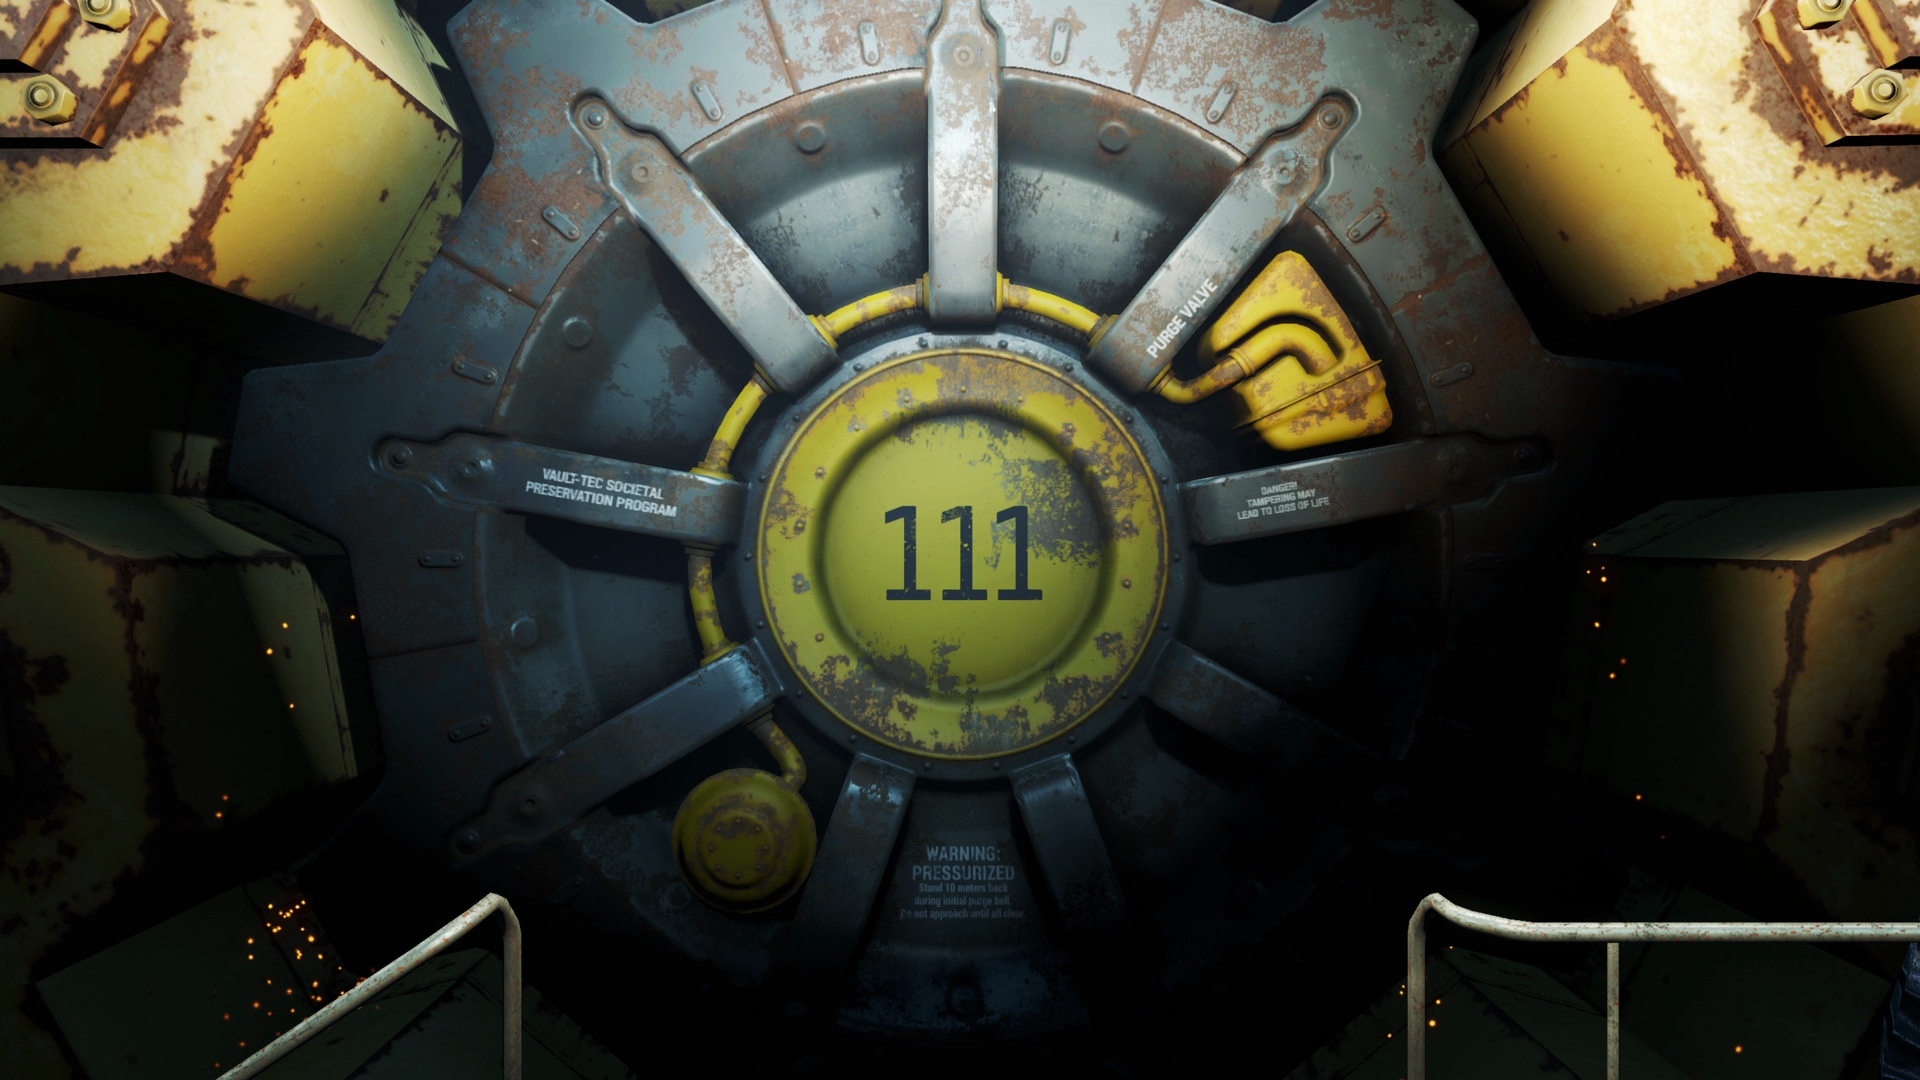 Fallout Please Stand By Wallpaper For Iphone - Fallout 4 Vault , HD Wallpaper & Backgrounds